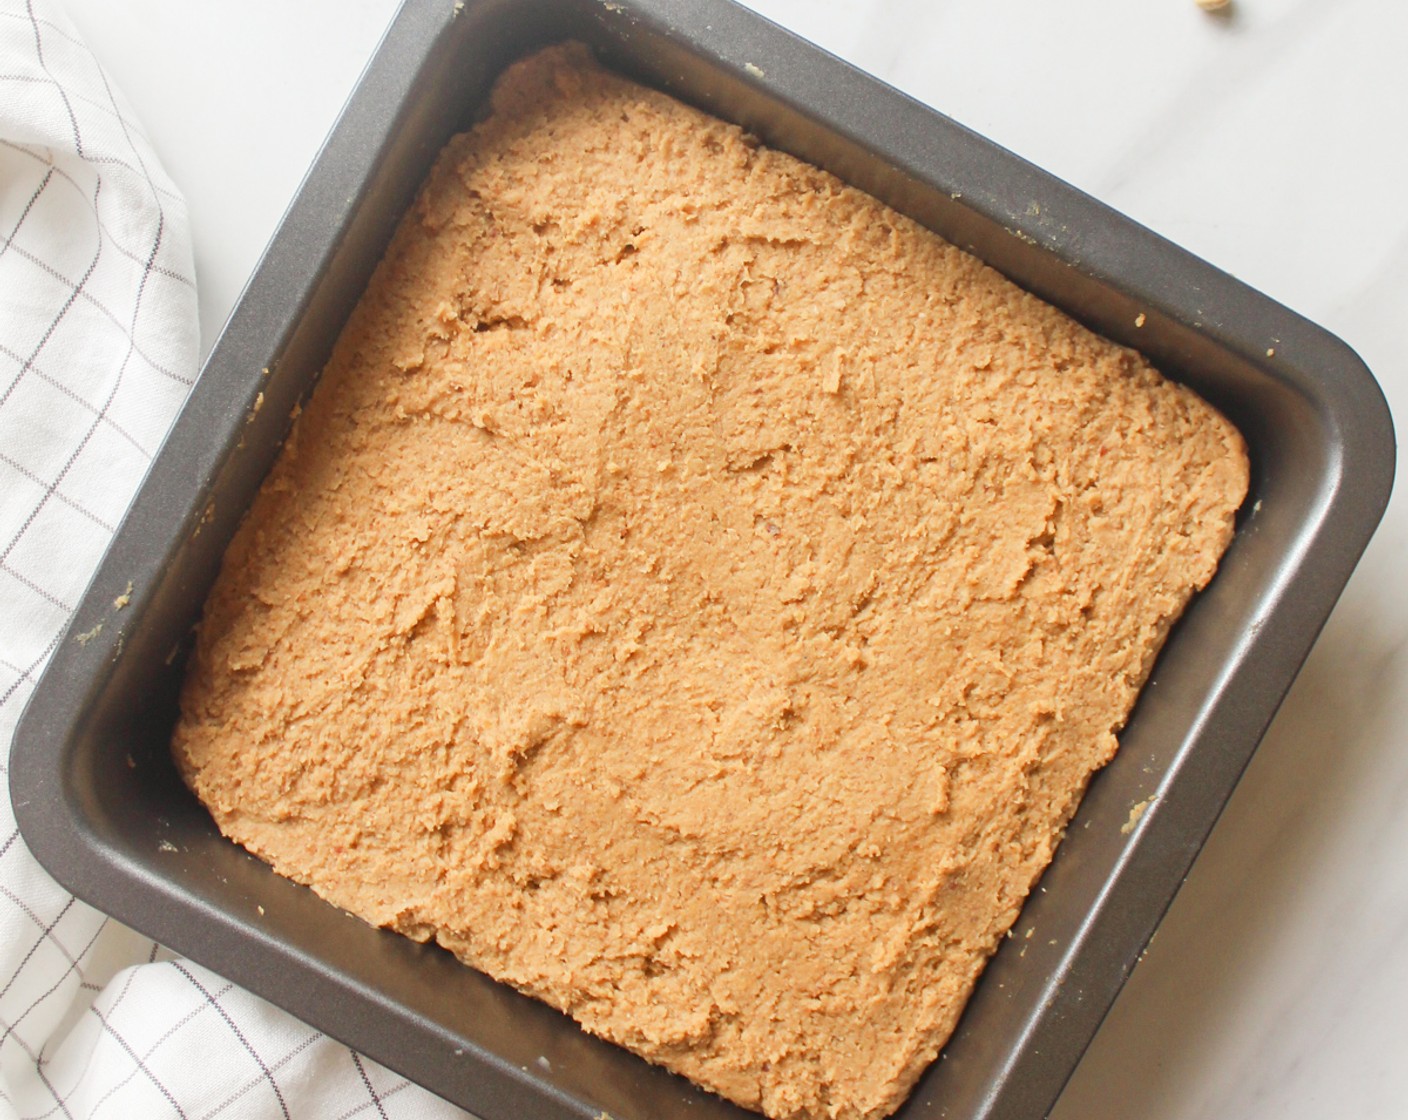 step 5 Transfer the batter into a greased 8x8-inch baking pan. Smooth it out using a spatula.